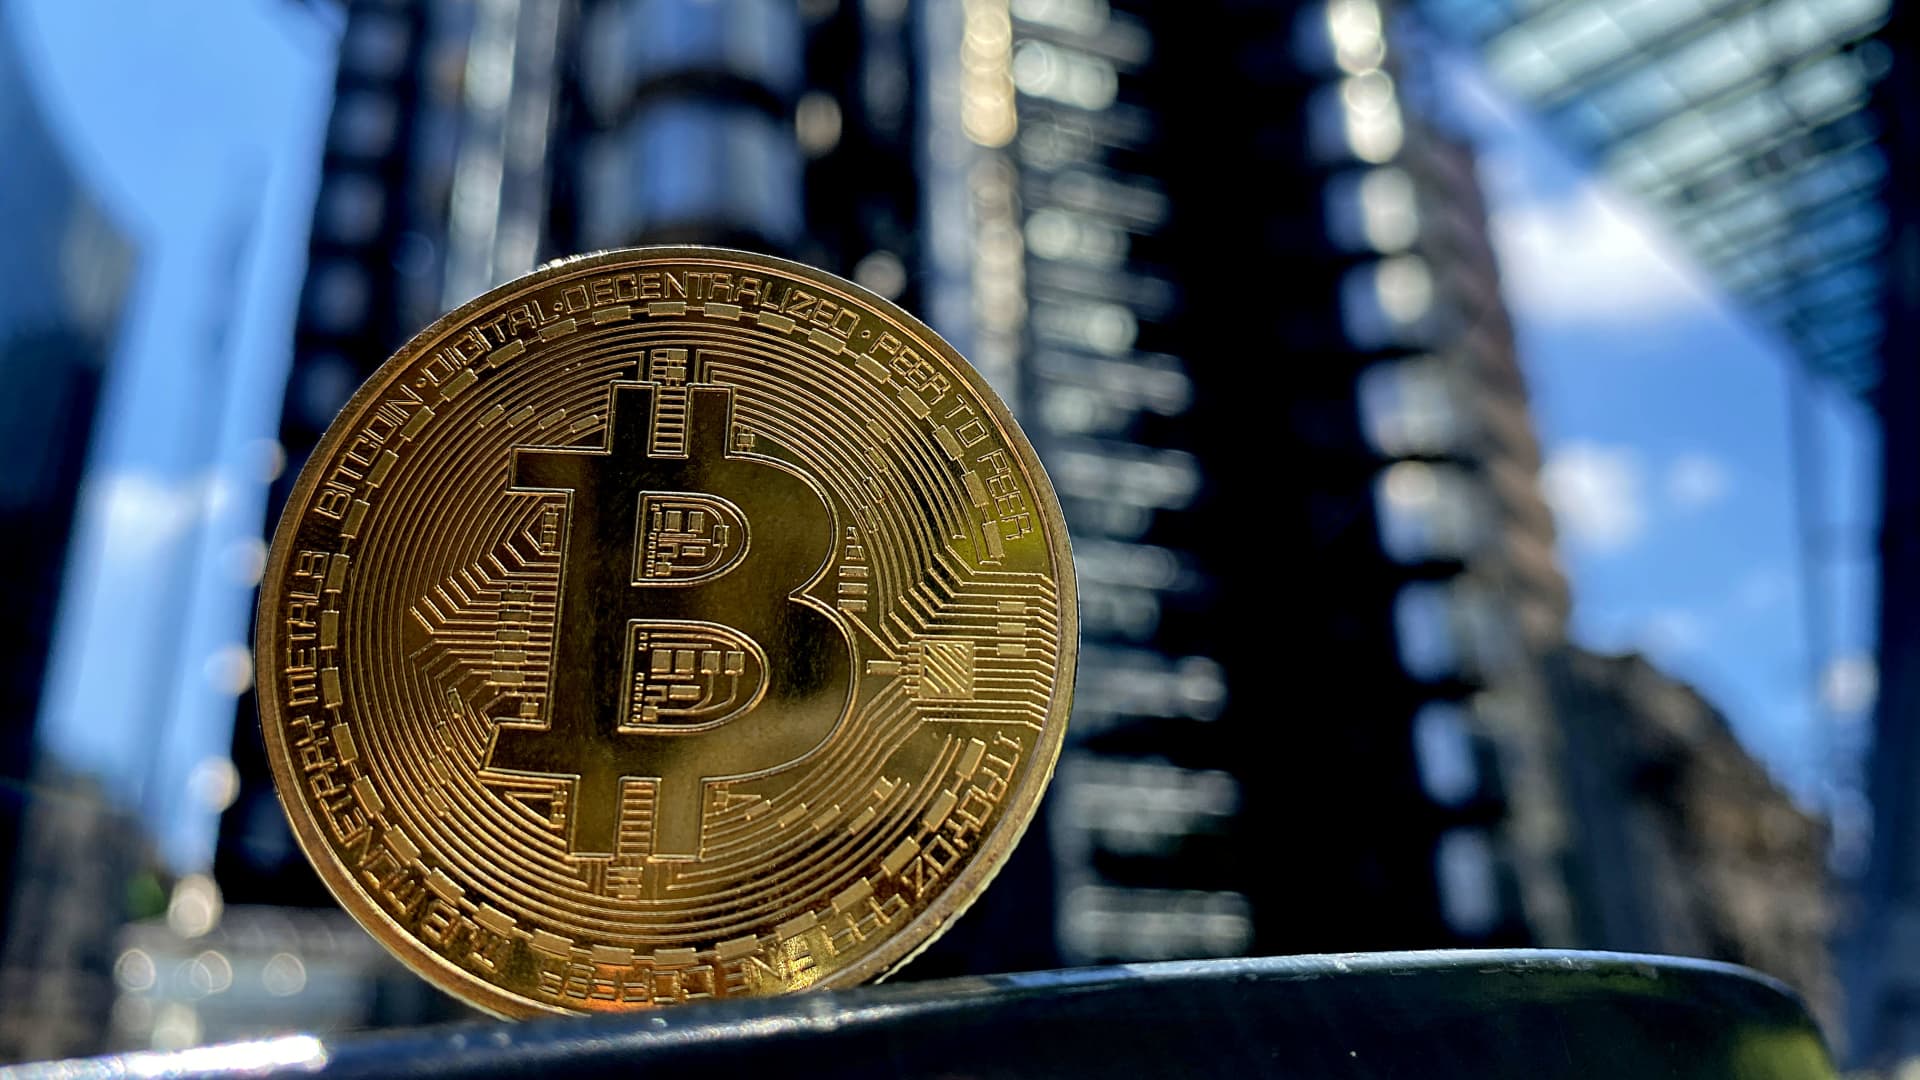 Bitcoin rises above $31,000 to highest level in more than a year to cap the week